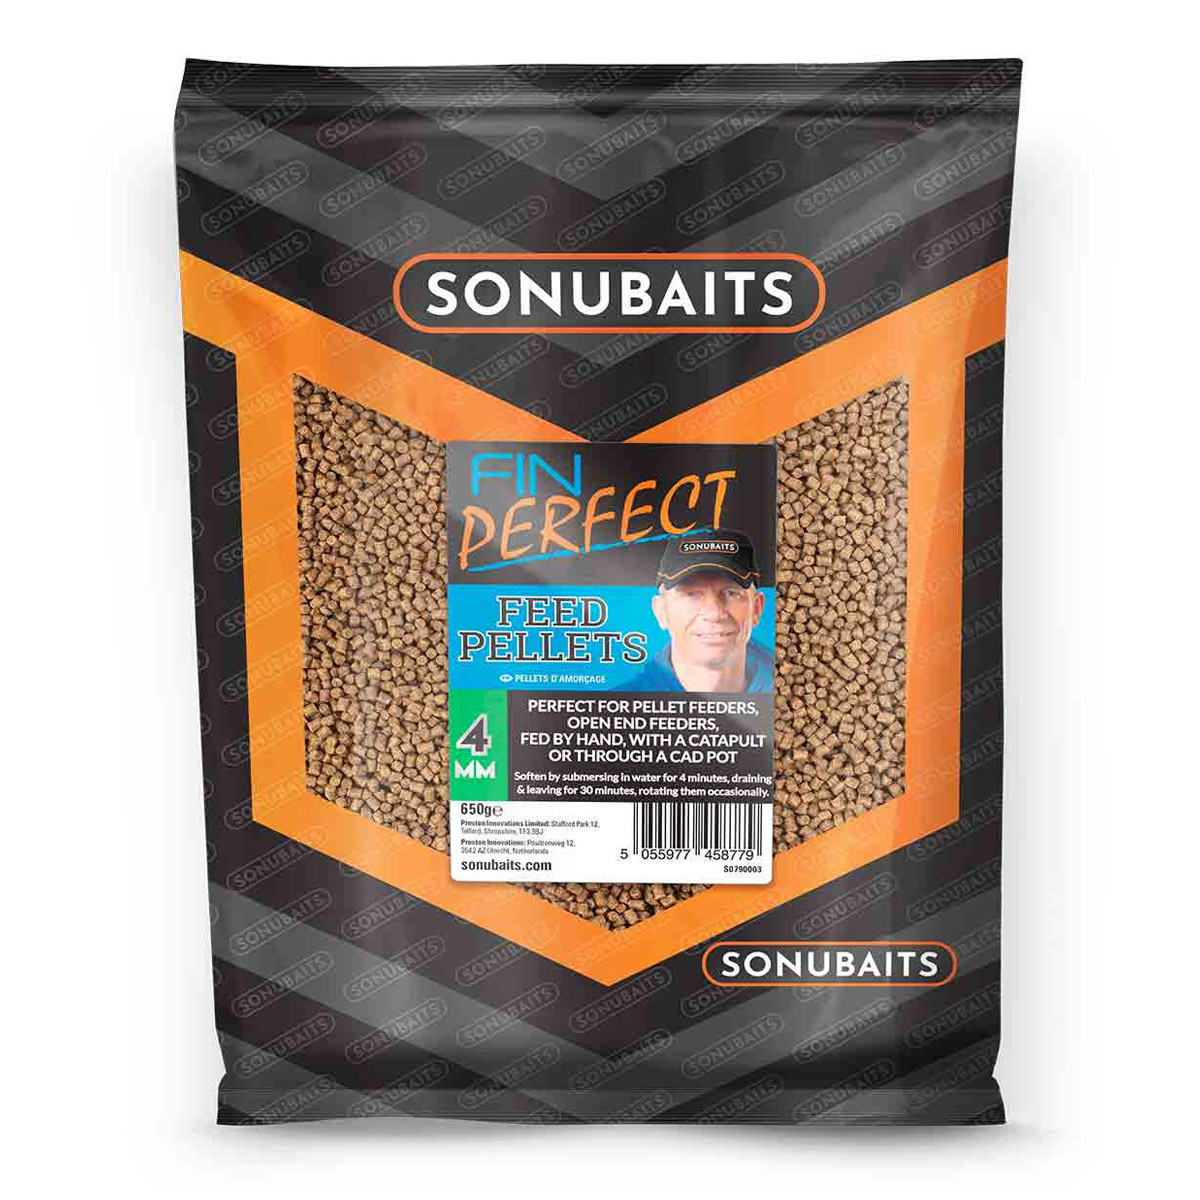 Sonubaits Fin Perfect Feed Pellets -  4 mm